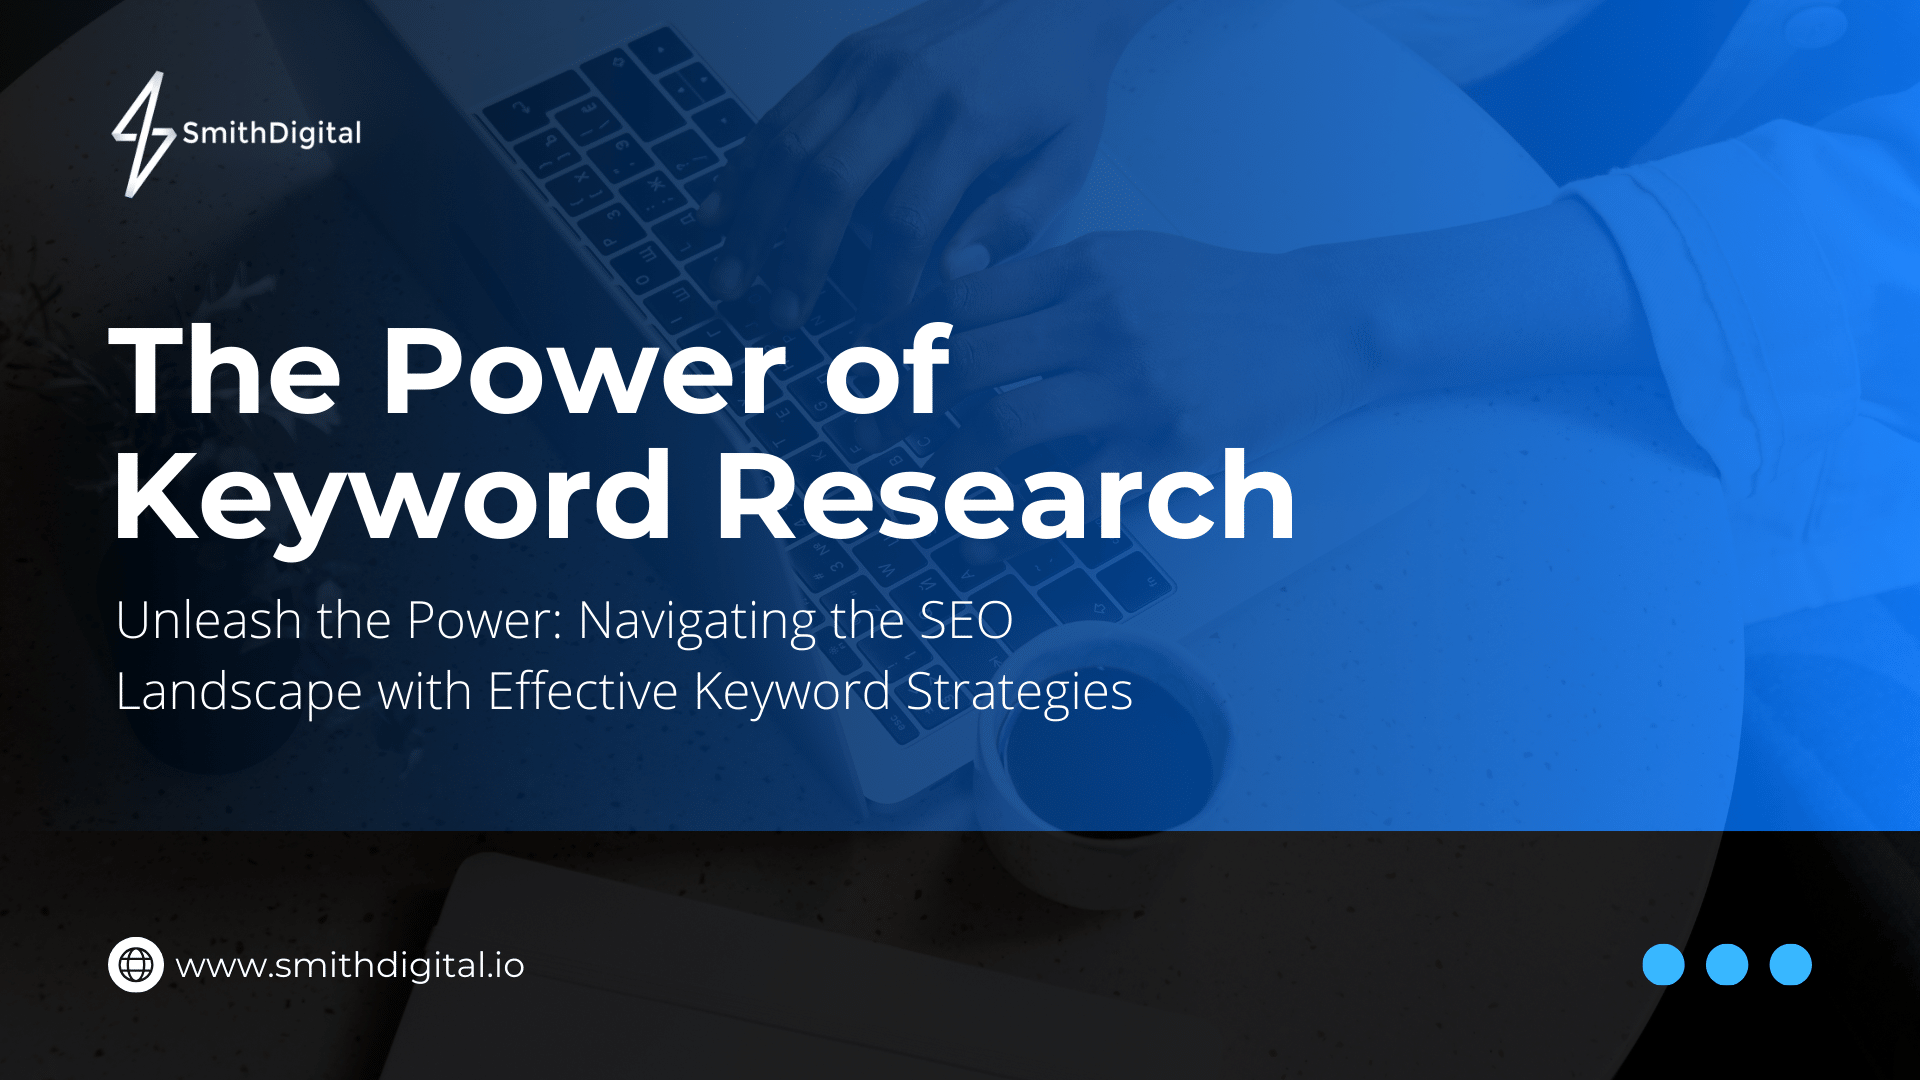 The Power of Keyword Research: Boosting Revenue through Effective SEO